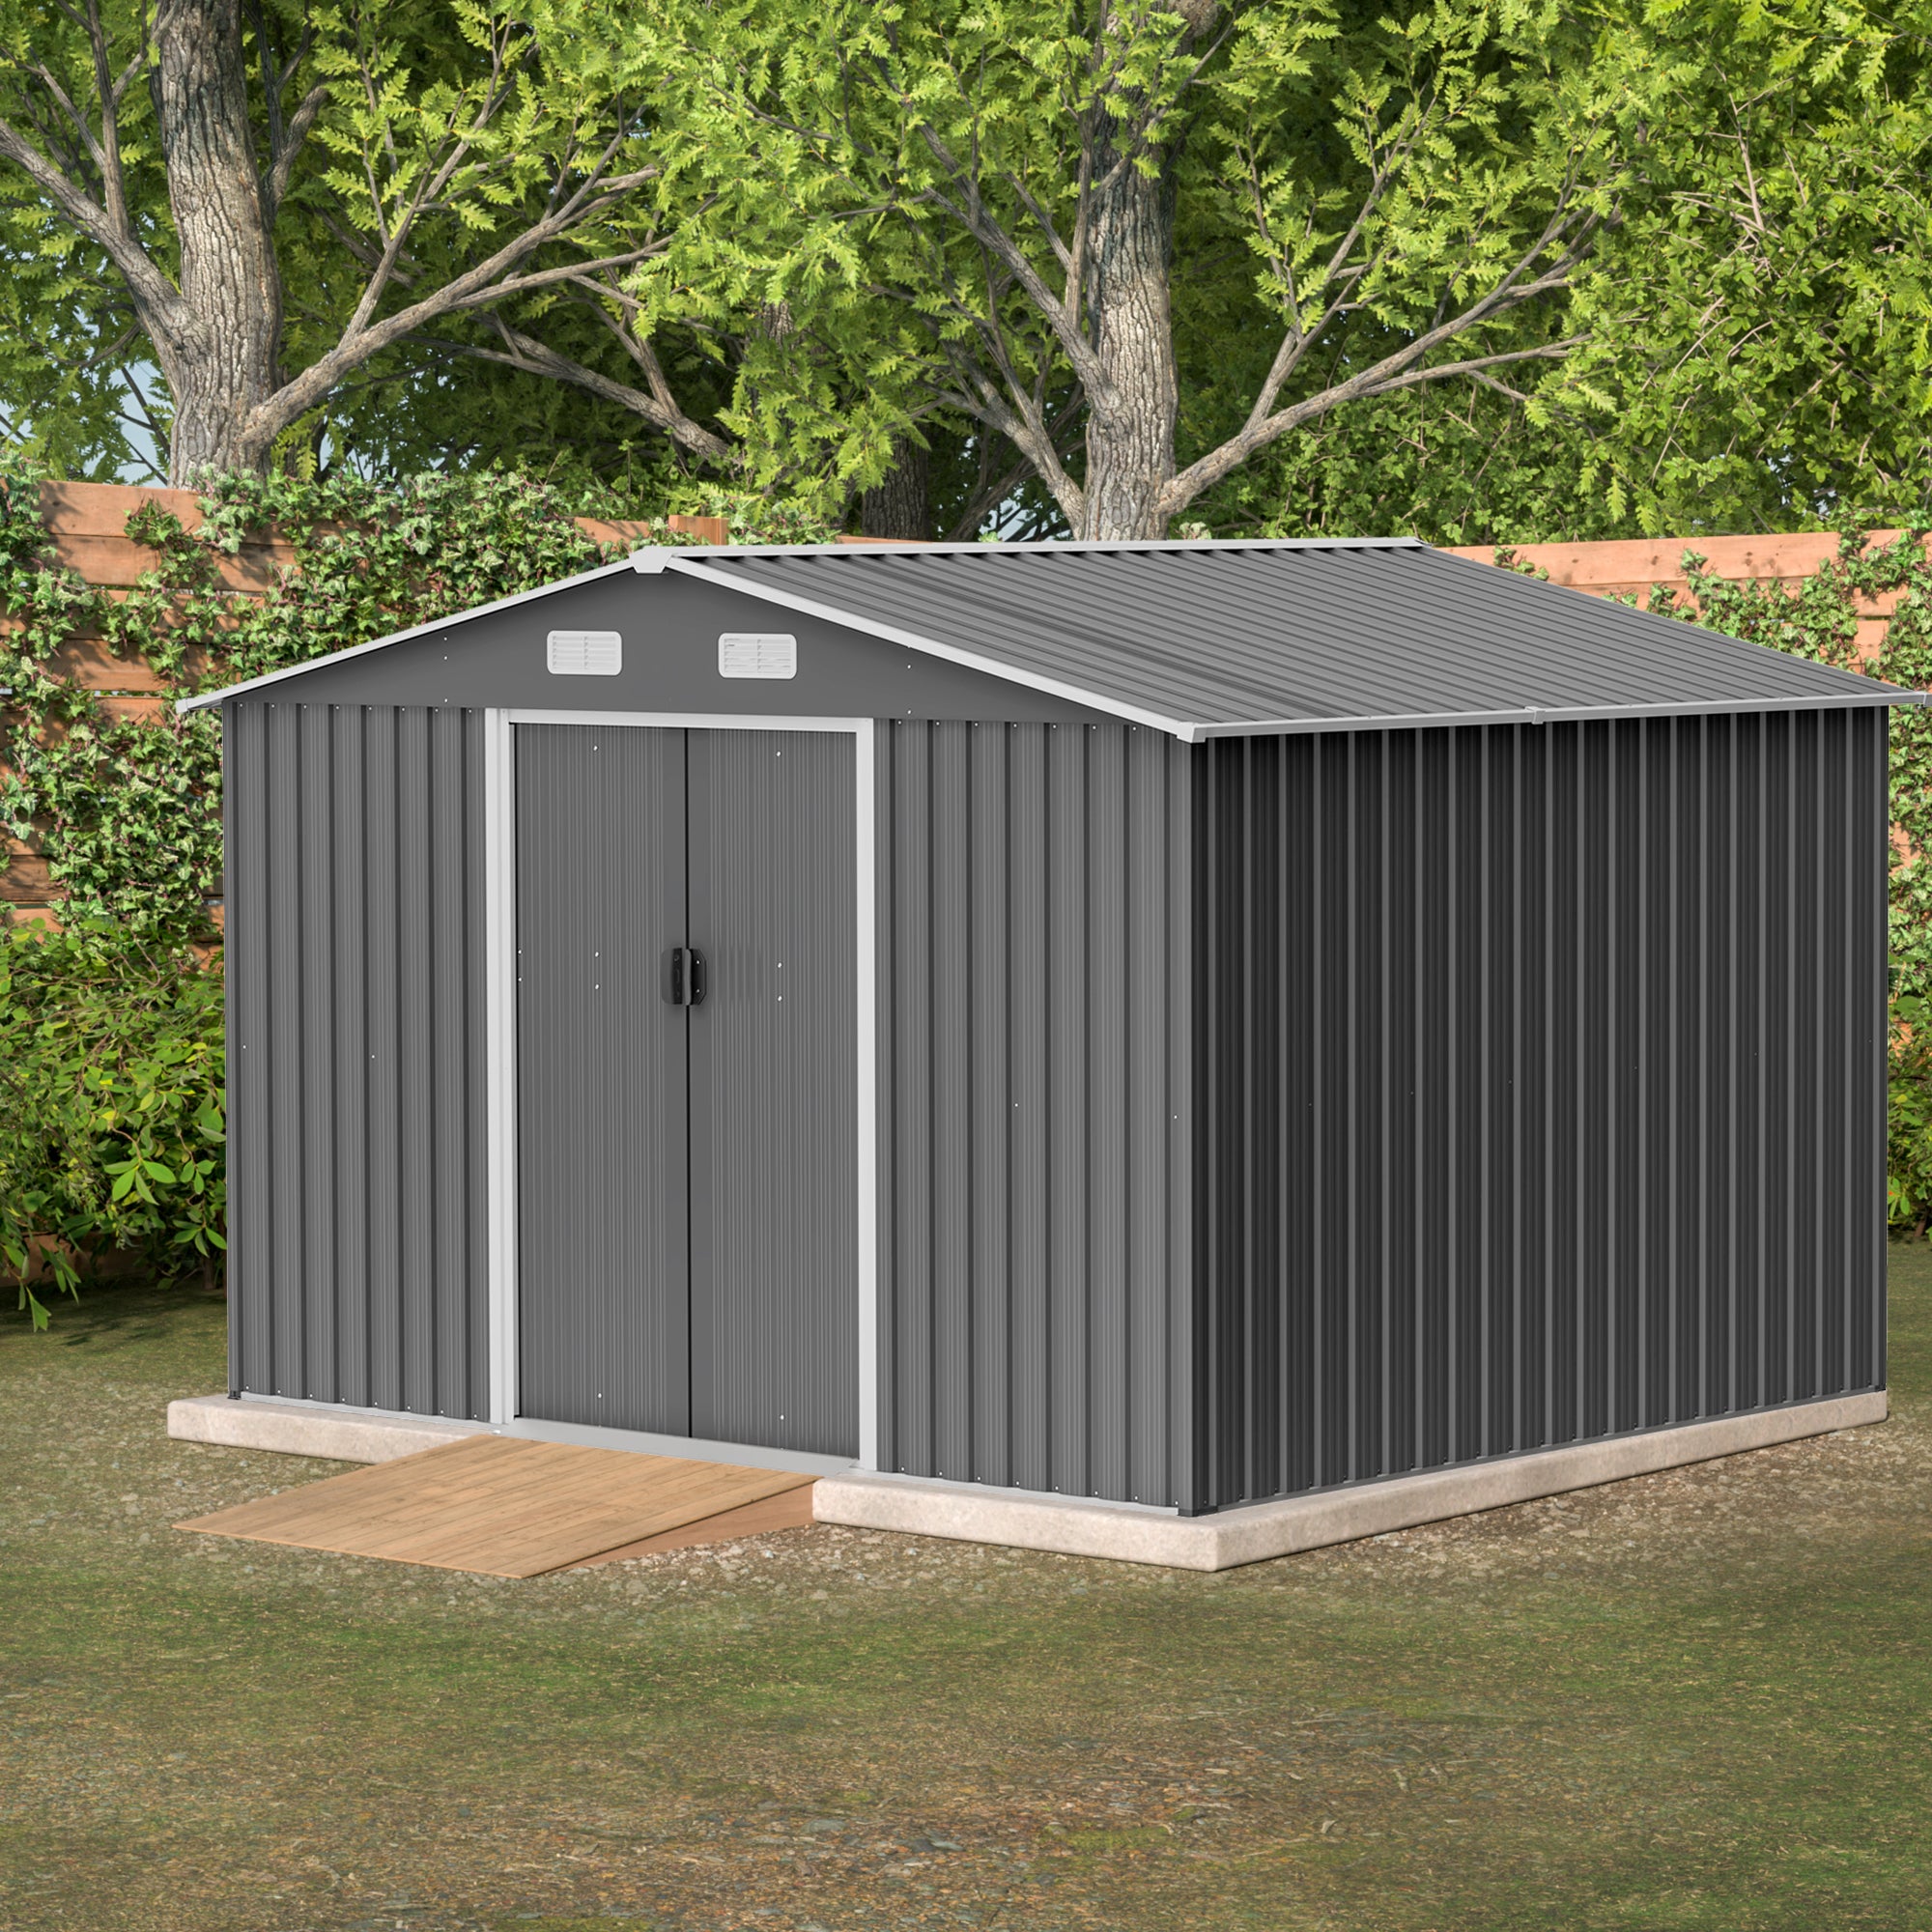 Grey Metal Storage Shed 10x8 FT - Lockable, With Foundation